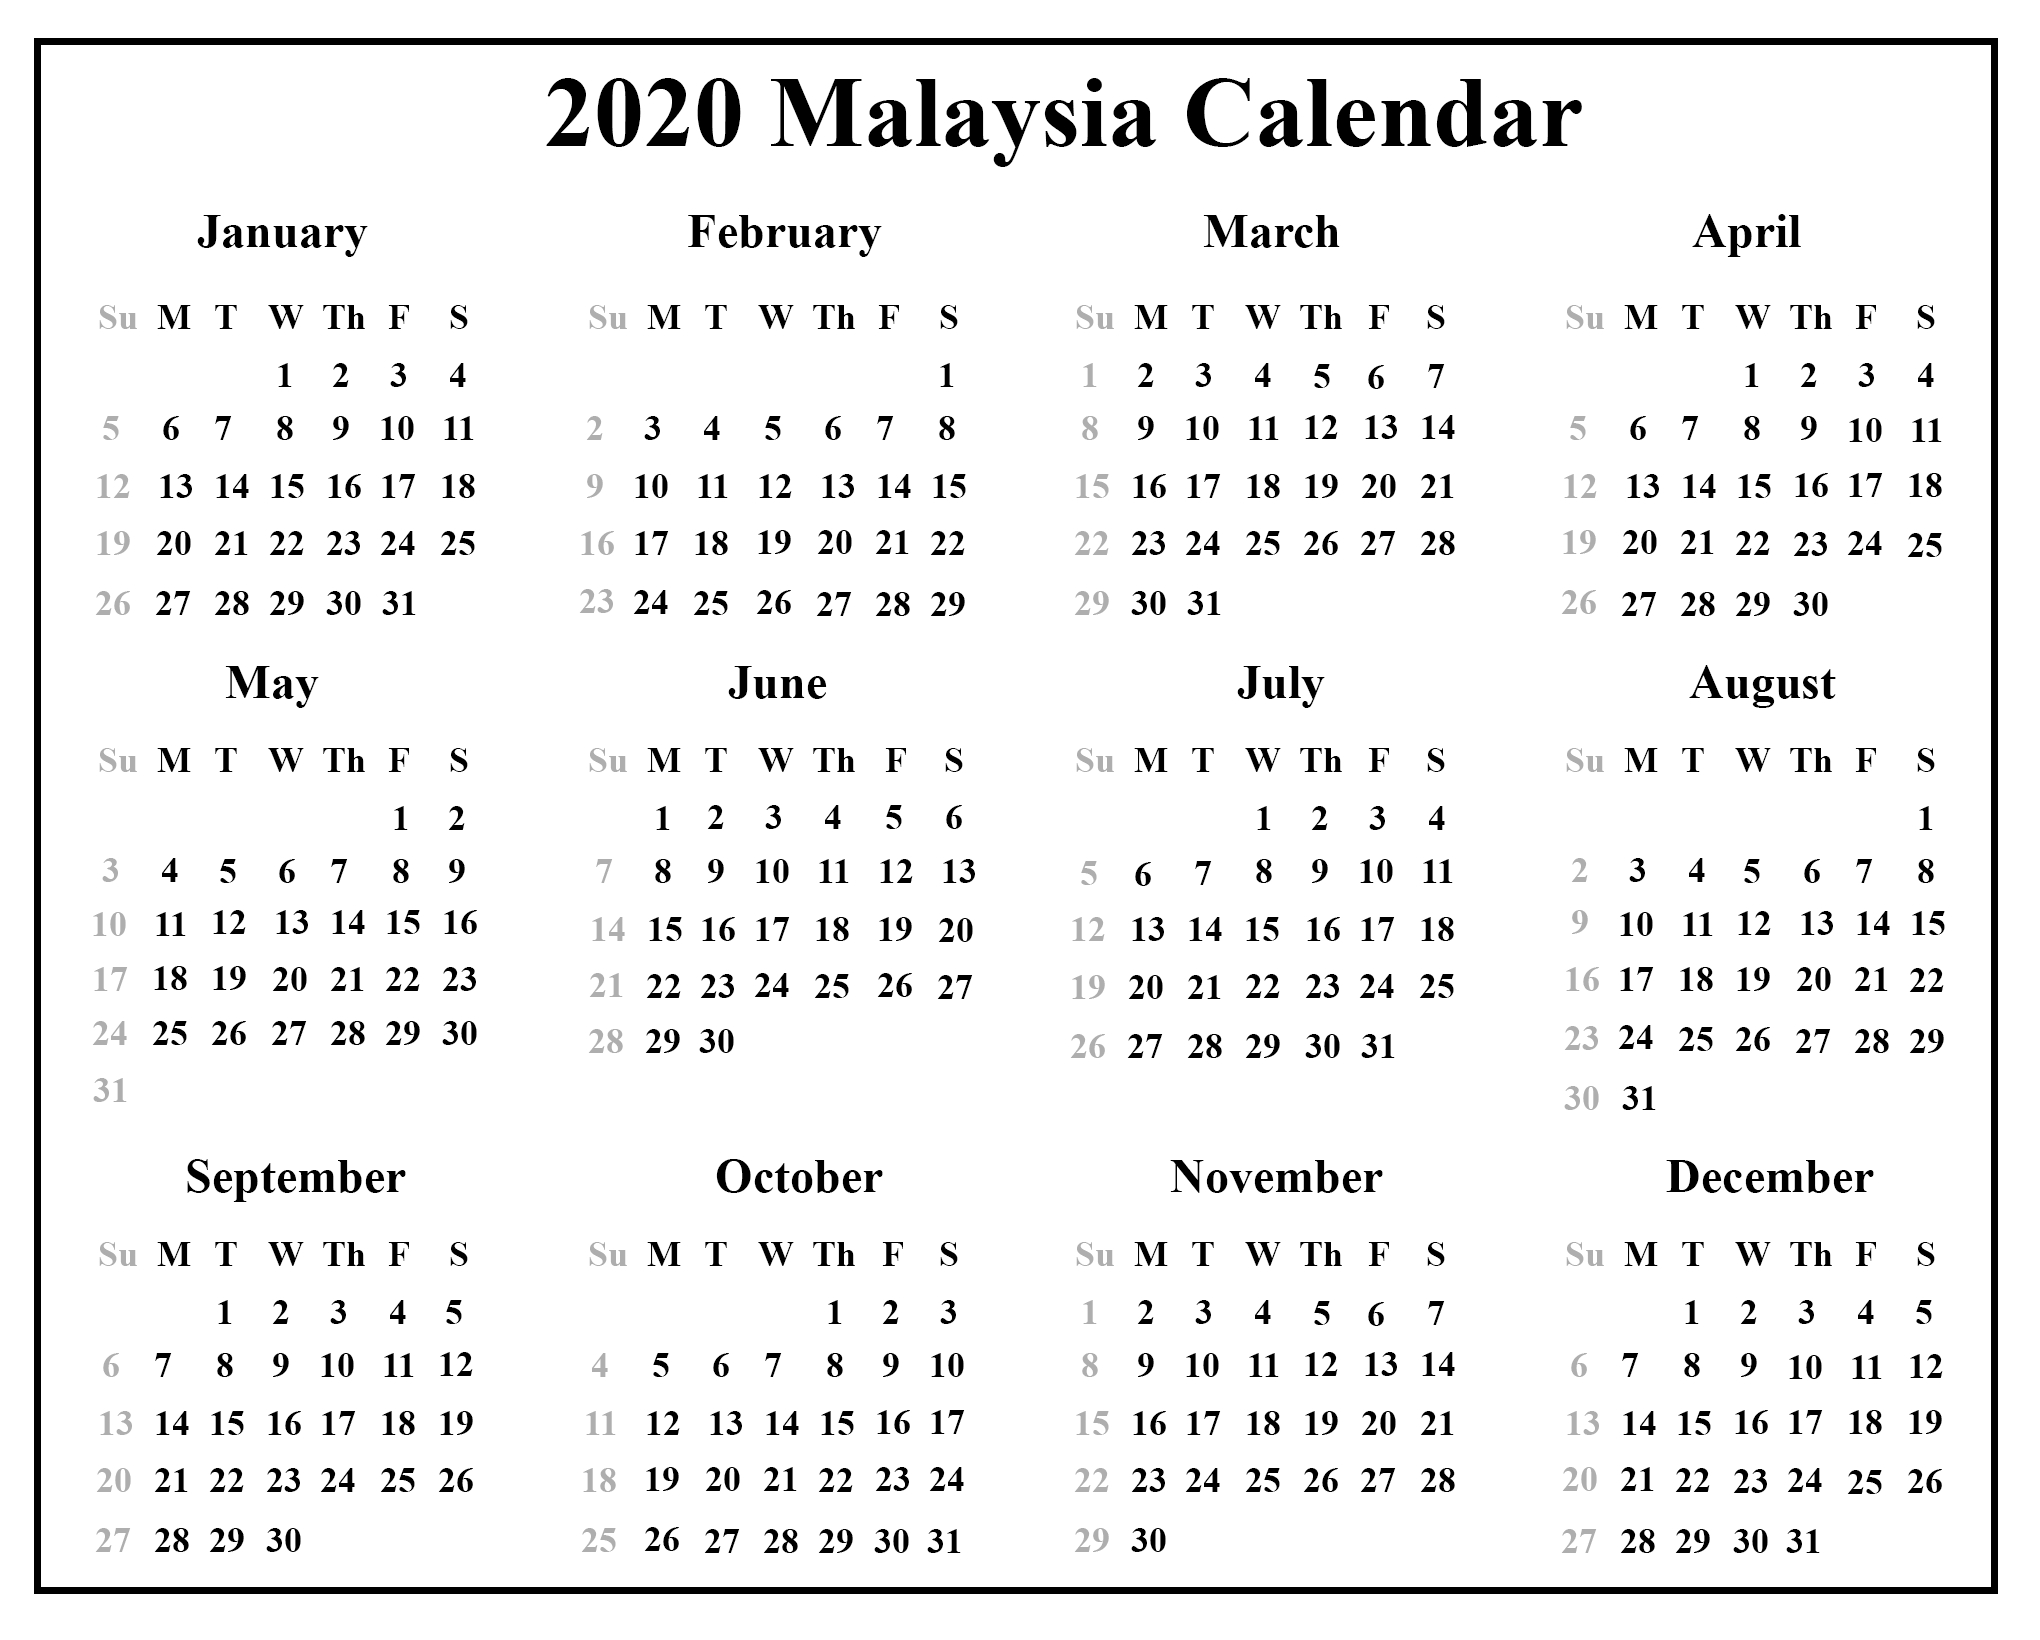 Download Free Blank Malaysia Calendar 2020 Template In Pdf-2022 Calendar Printable With Holidays Malaysia